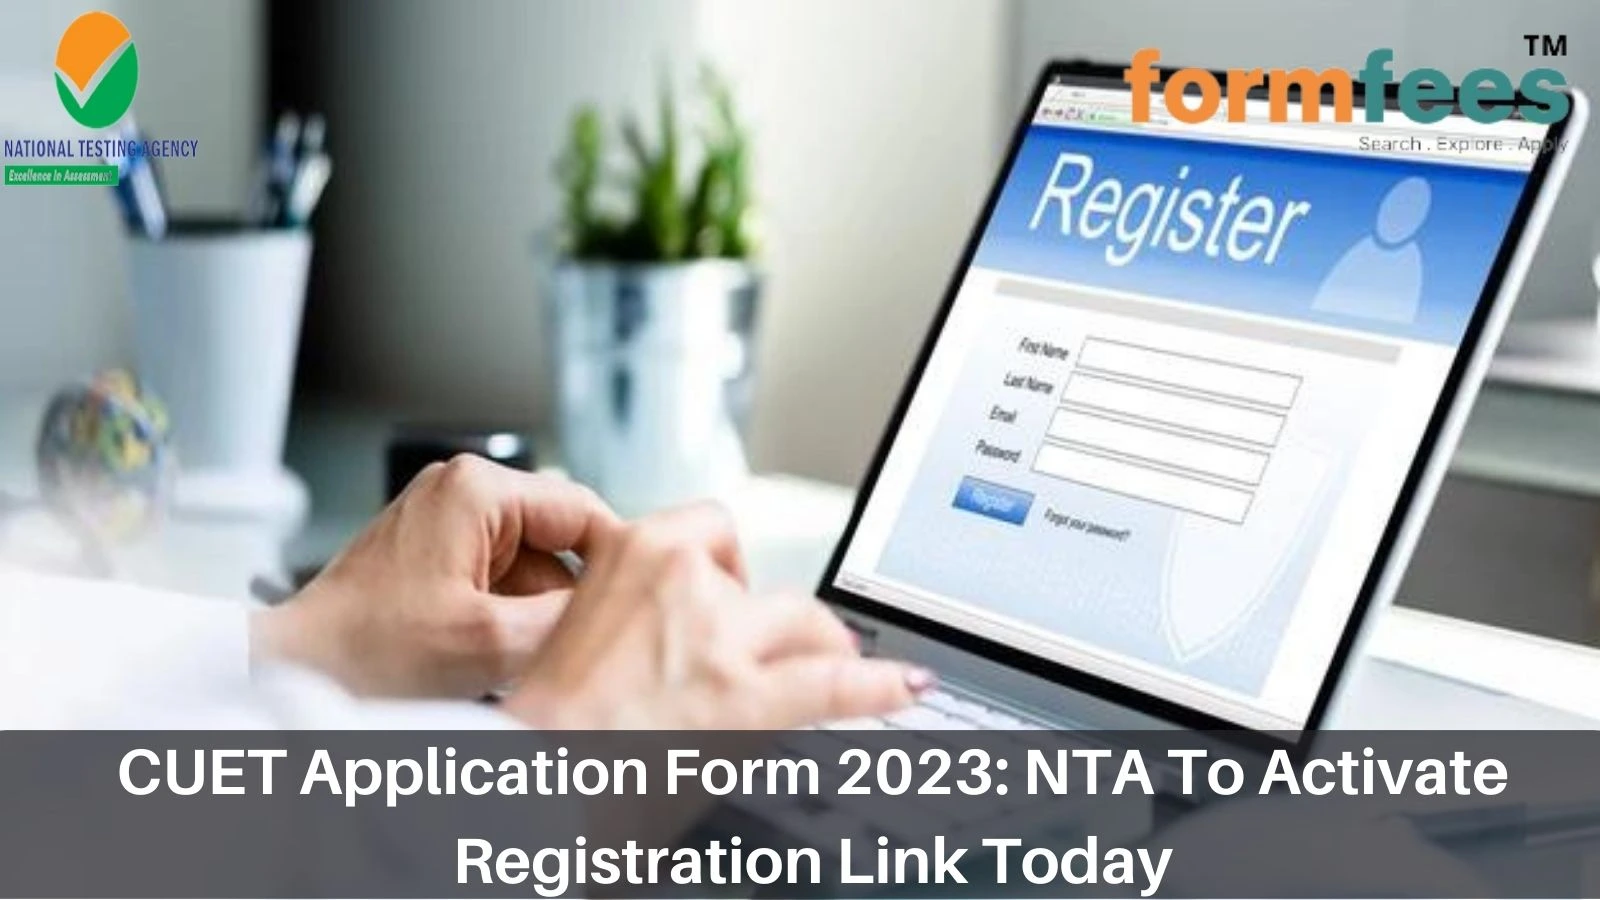 CUET Application Form 2023: NTA To Activate Registration Link Today